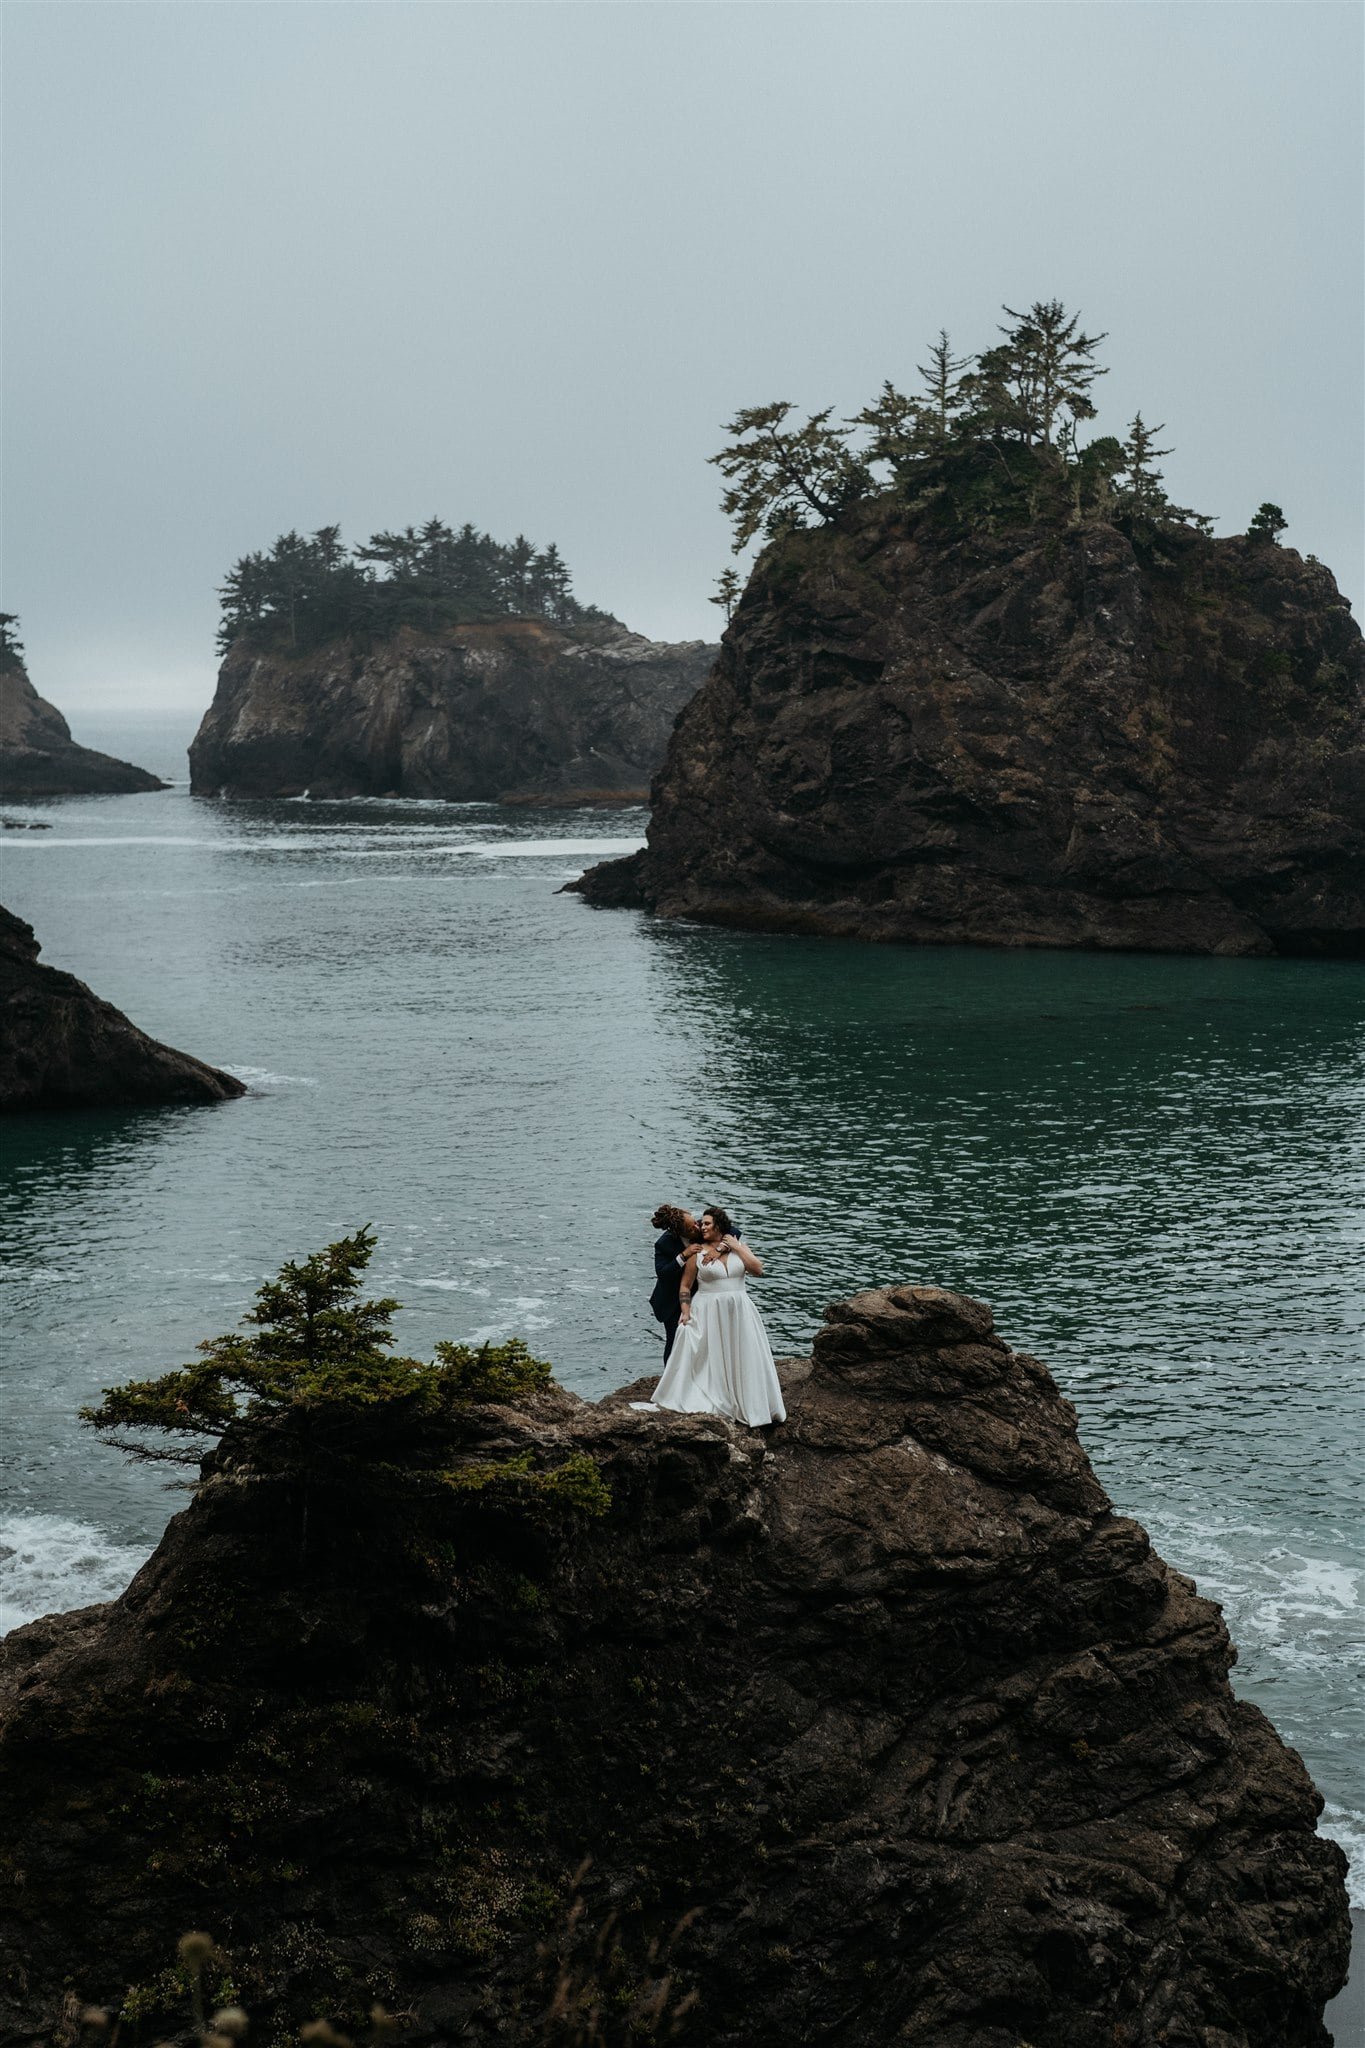 Brides stand on the rocky coast on the beach of their Oregon Coast elopement